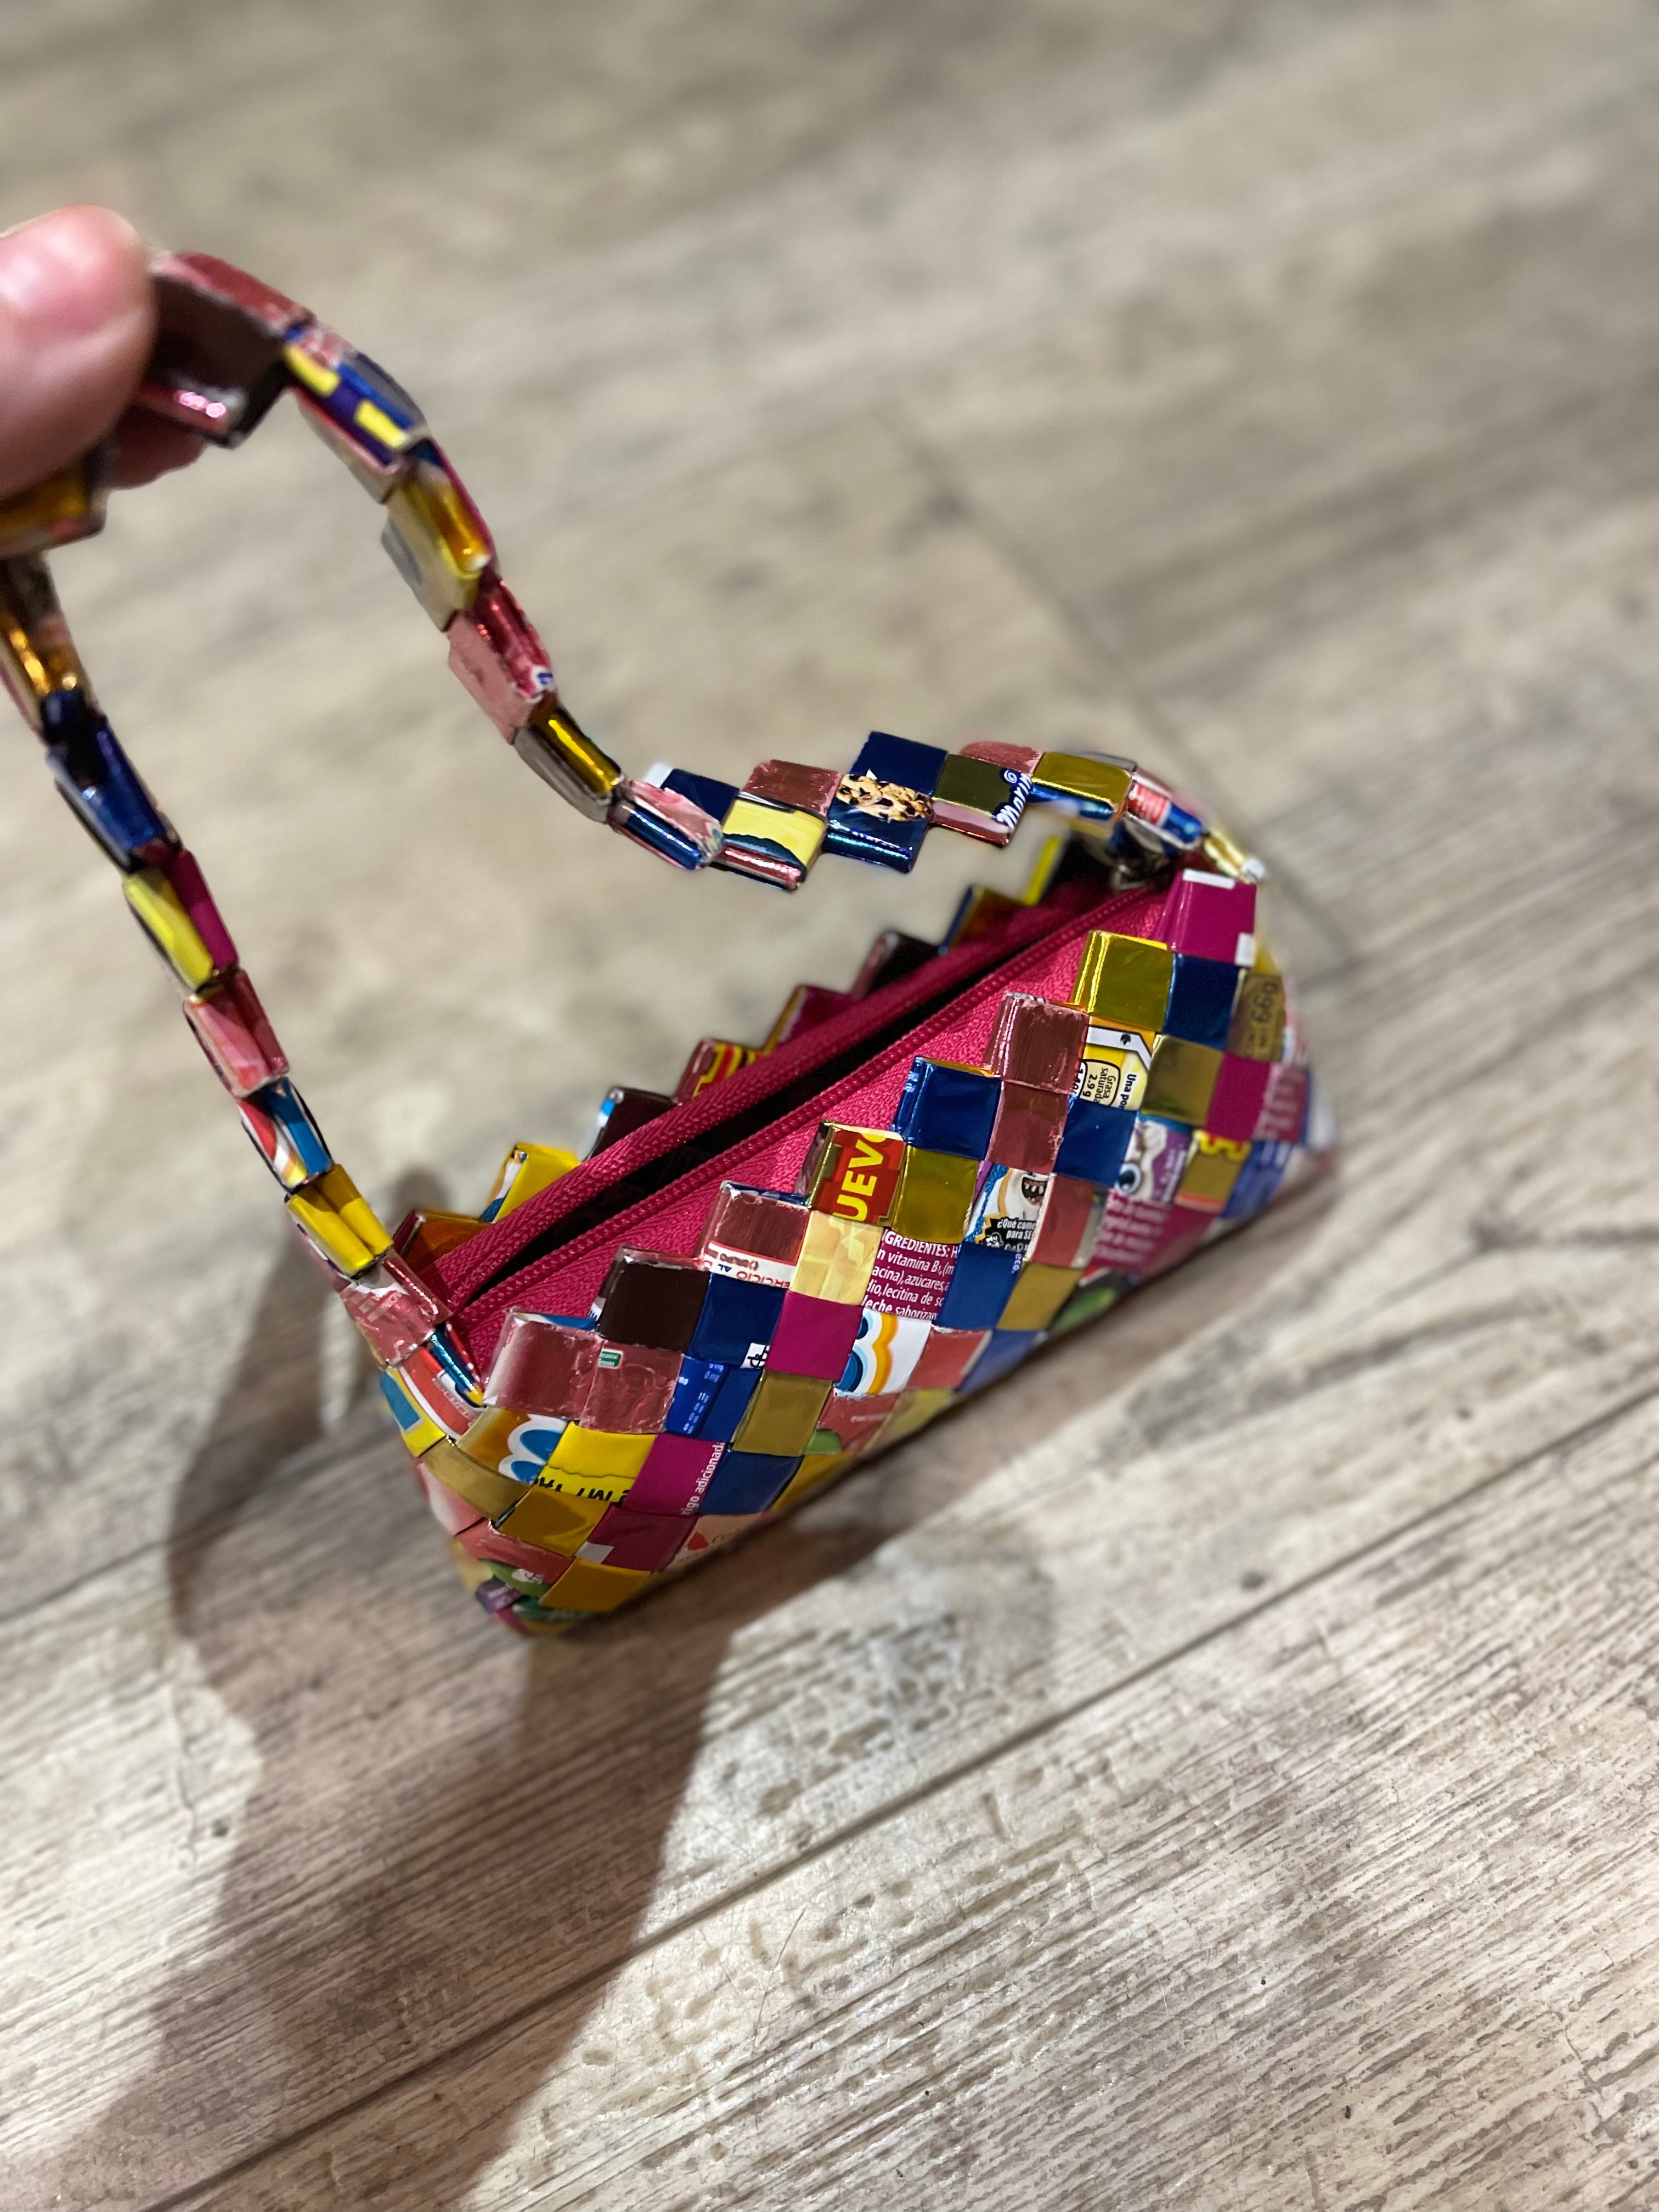 How To Make A Zig Zag Candy Wrapper Bag / Purse Part 1 - YouTube